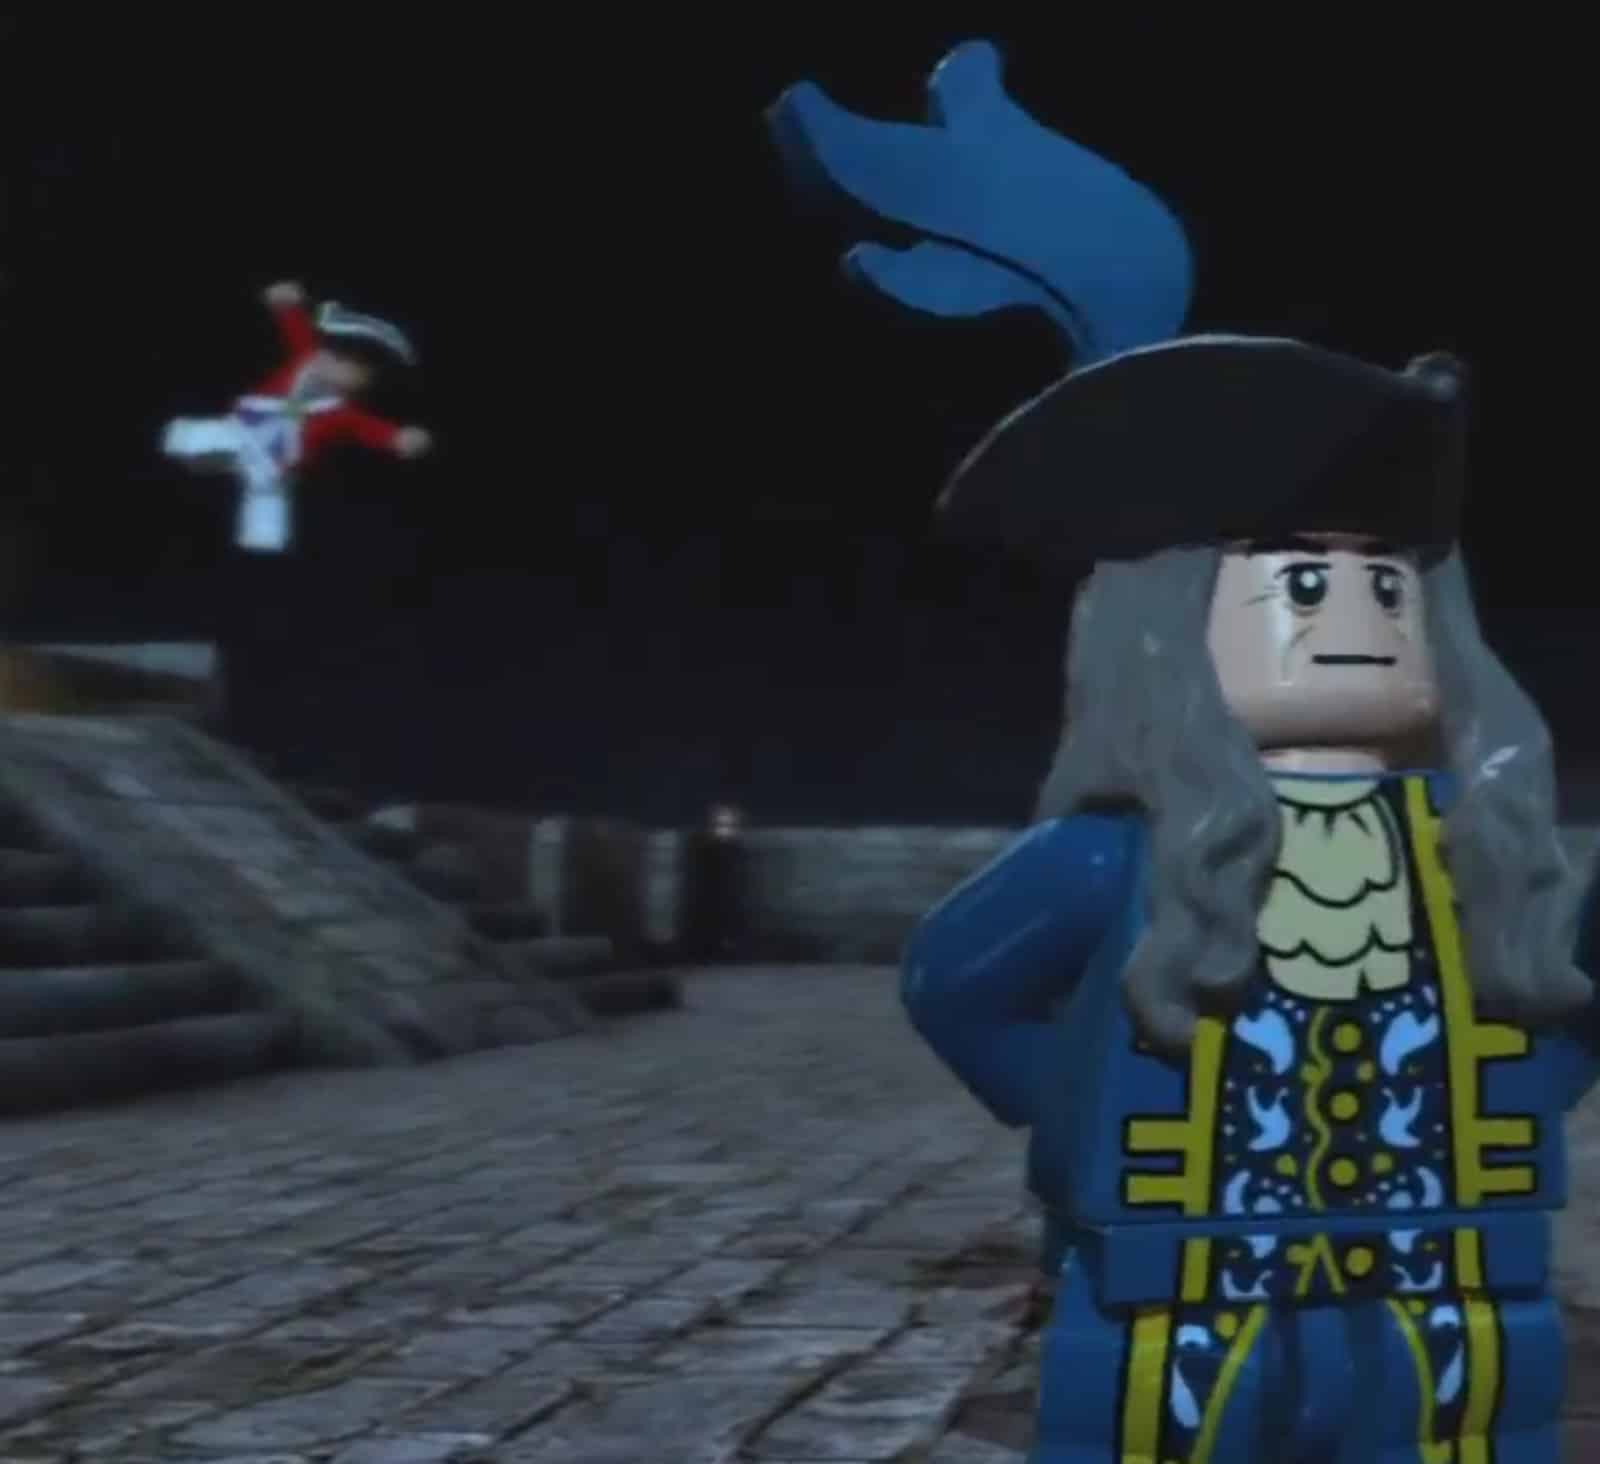 Eksisterer Panorama vedlægge governor-weatherby-lego-pirates-of-the-caribbean-character-screenshot